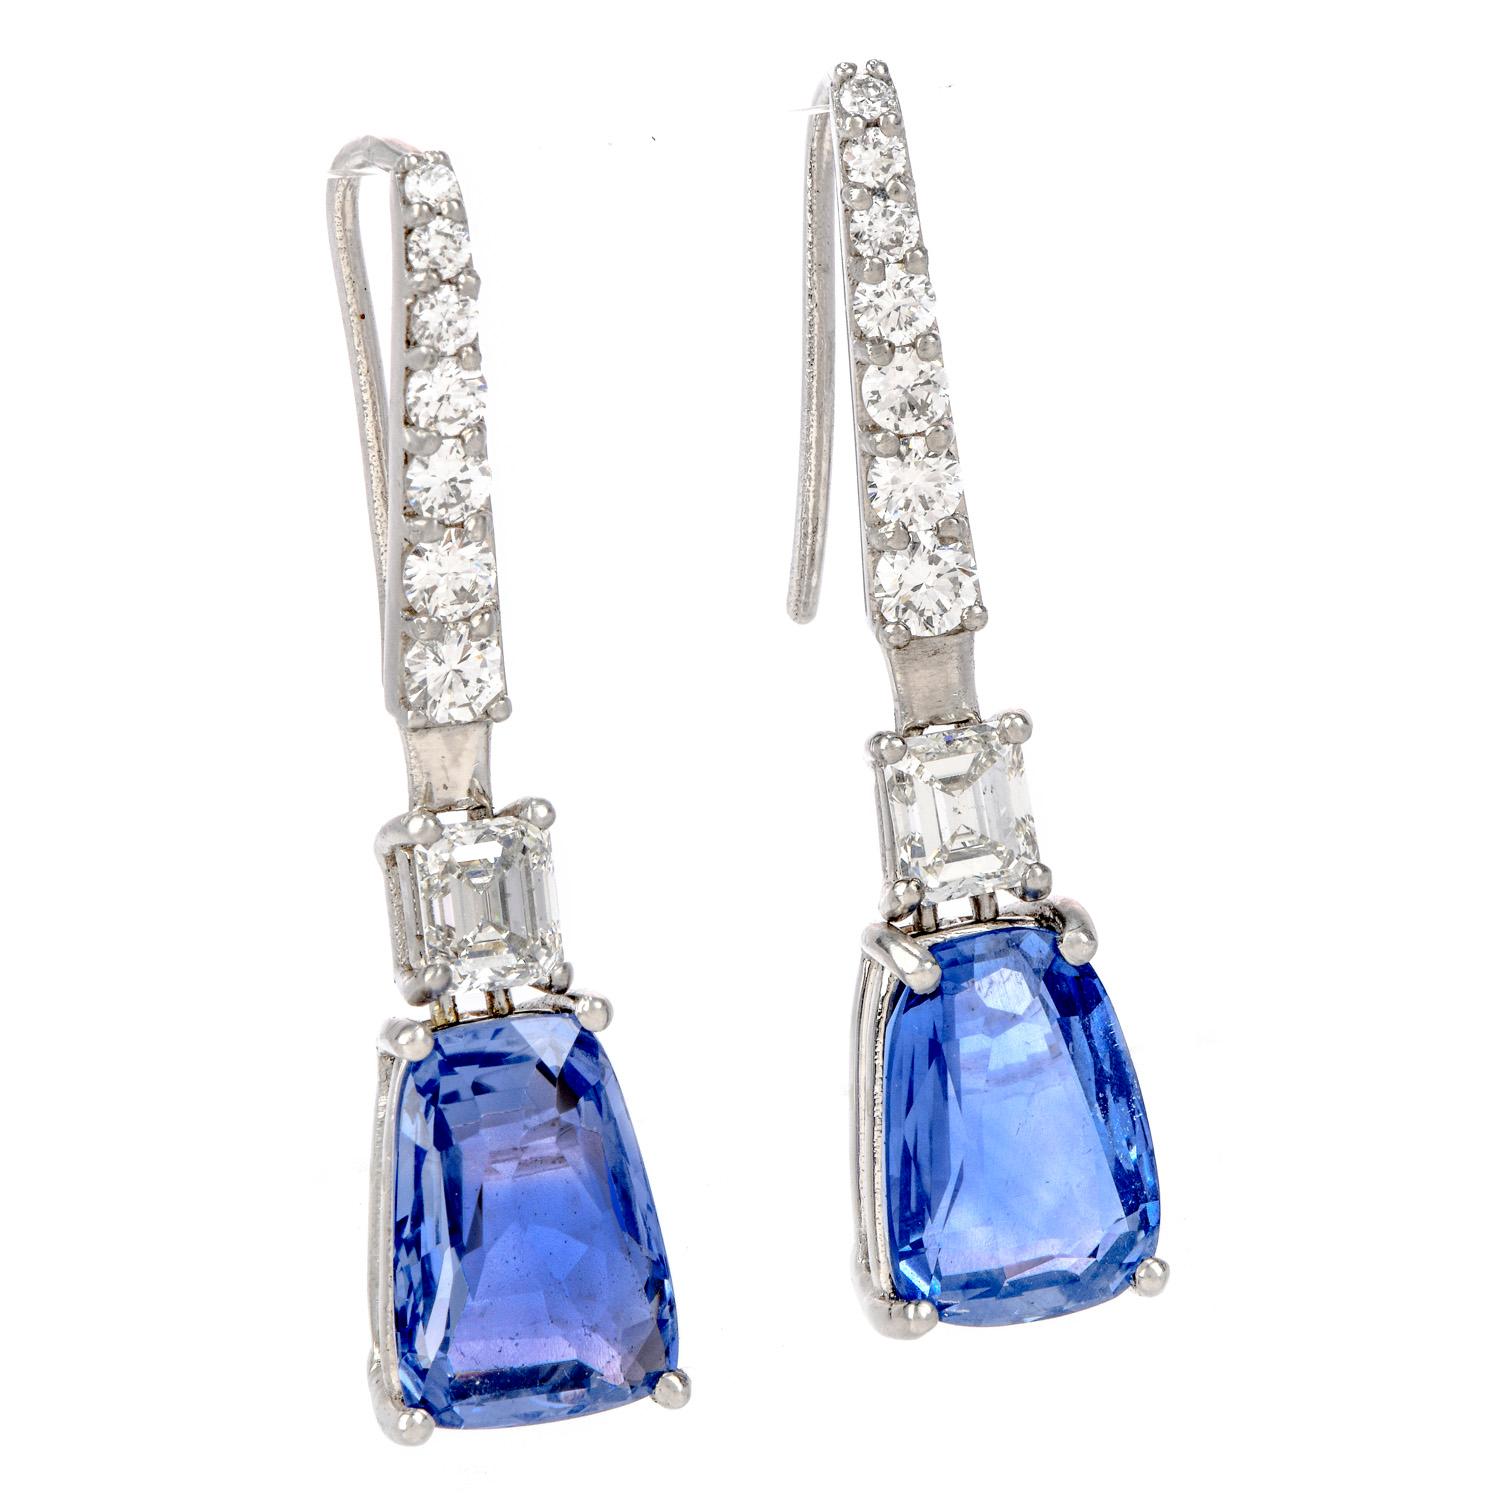 Set the example of pure elegance with these gorgeous GIA Diamond No Heat Ceylon Sapphire Platinum Drop Earrings!
These earrings hold two GIA certified sapphires of a modified trapezoid mixed cut, transparent clarity and weighing in at 8.27 carats